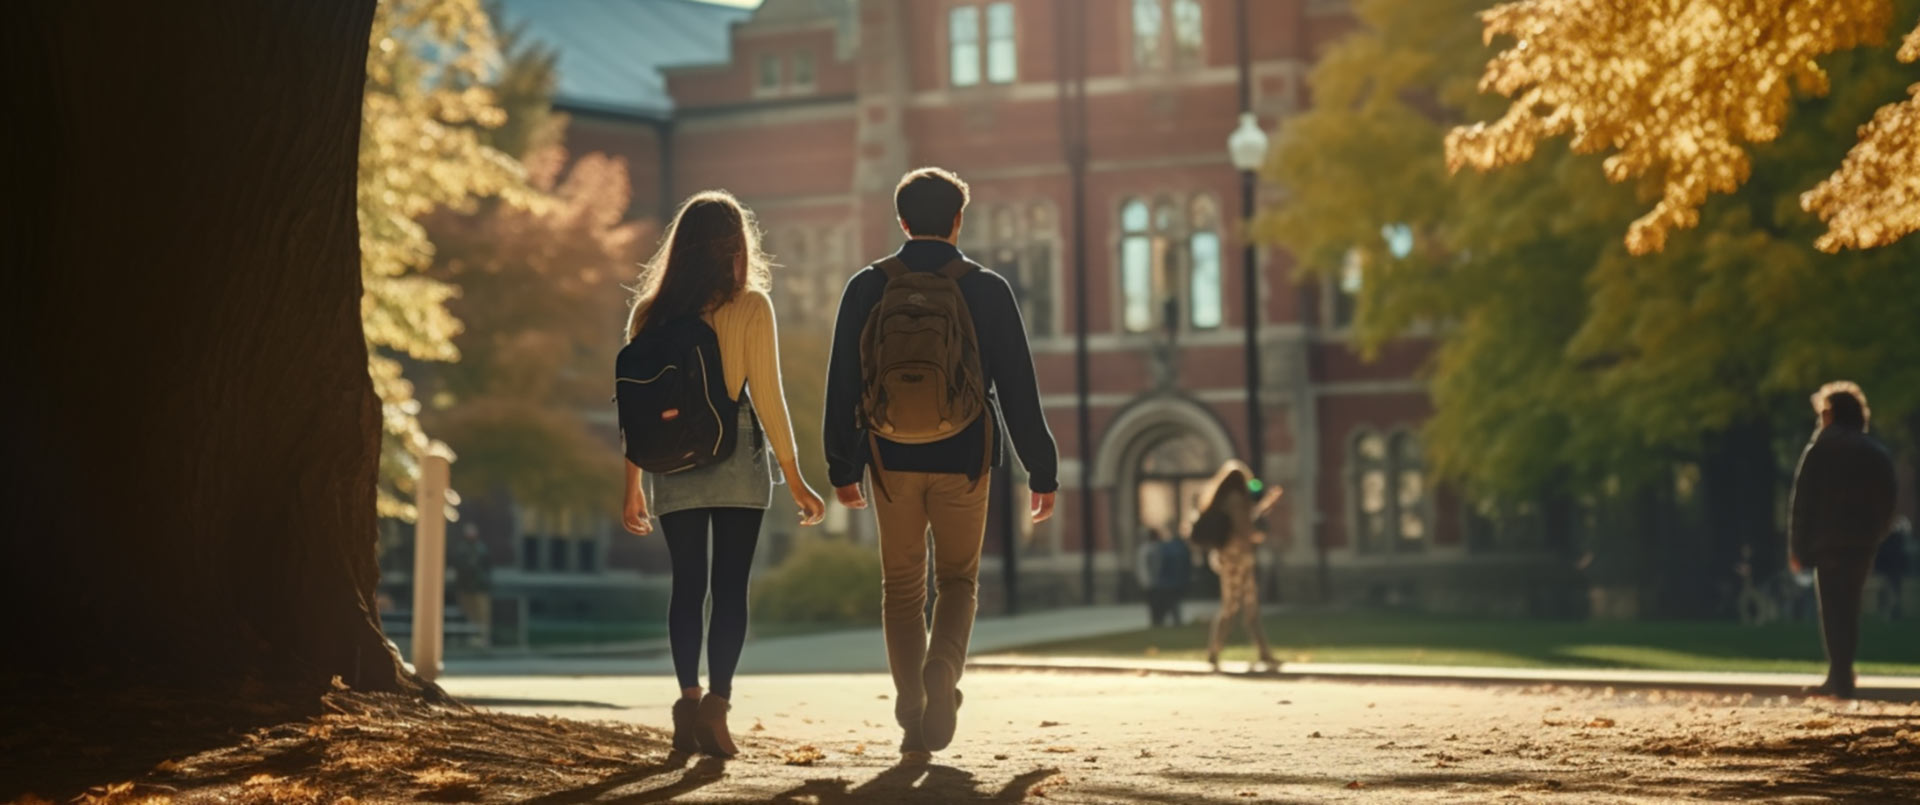 Students walking on a campus to school